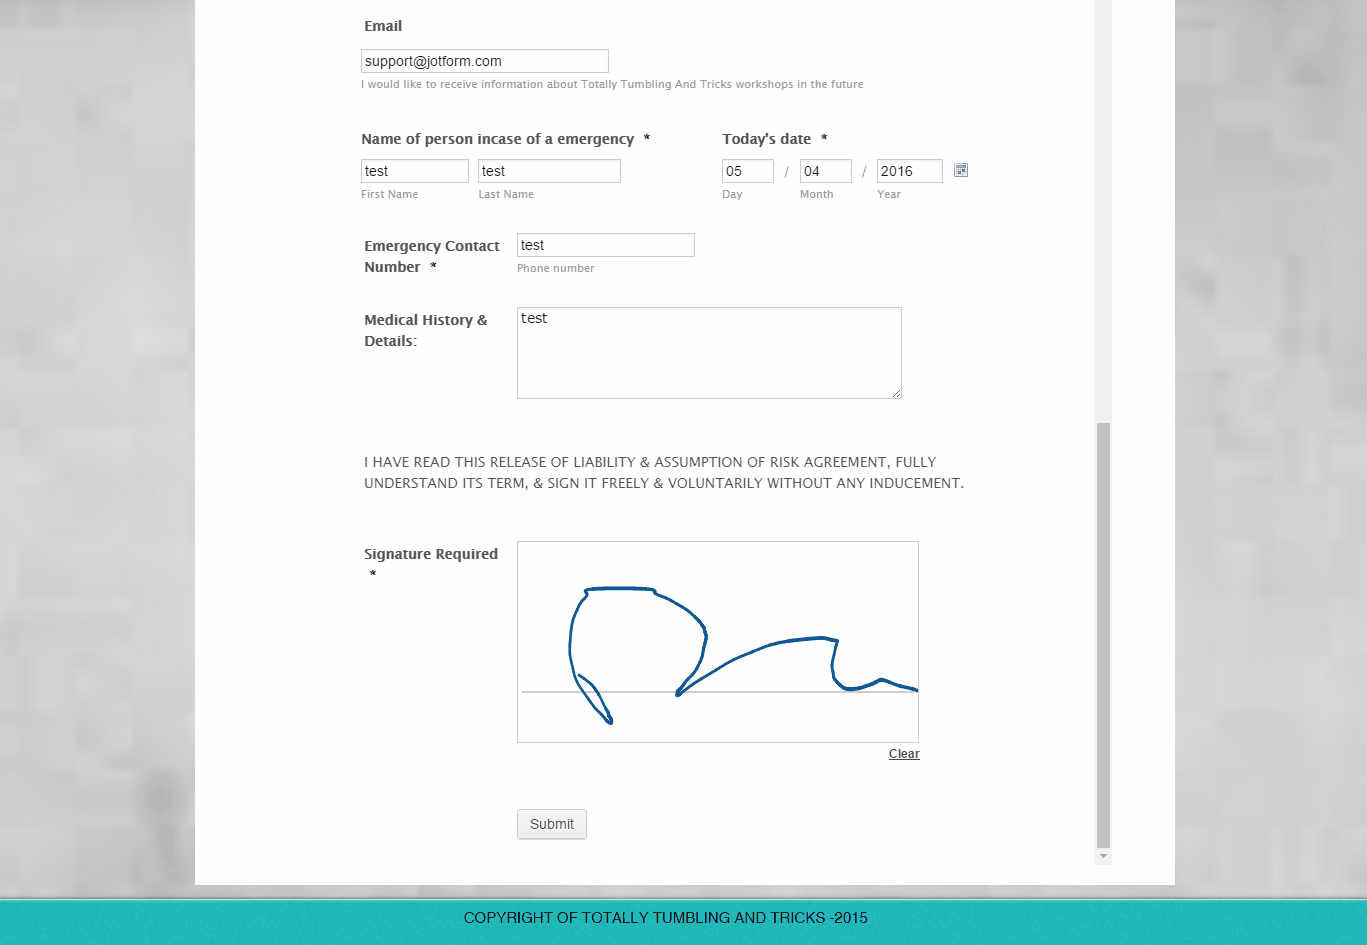 My Customers are telling me My Forms on My Website are not Submitting Image 1 Screenshot 20